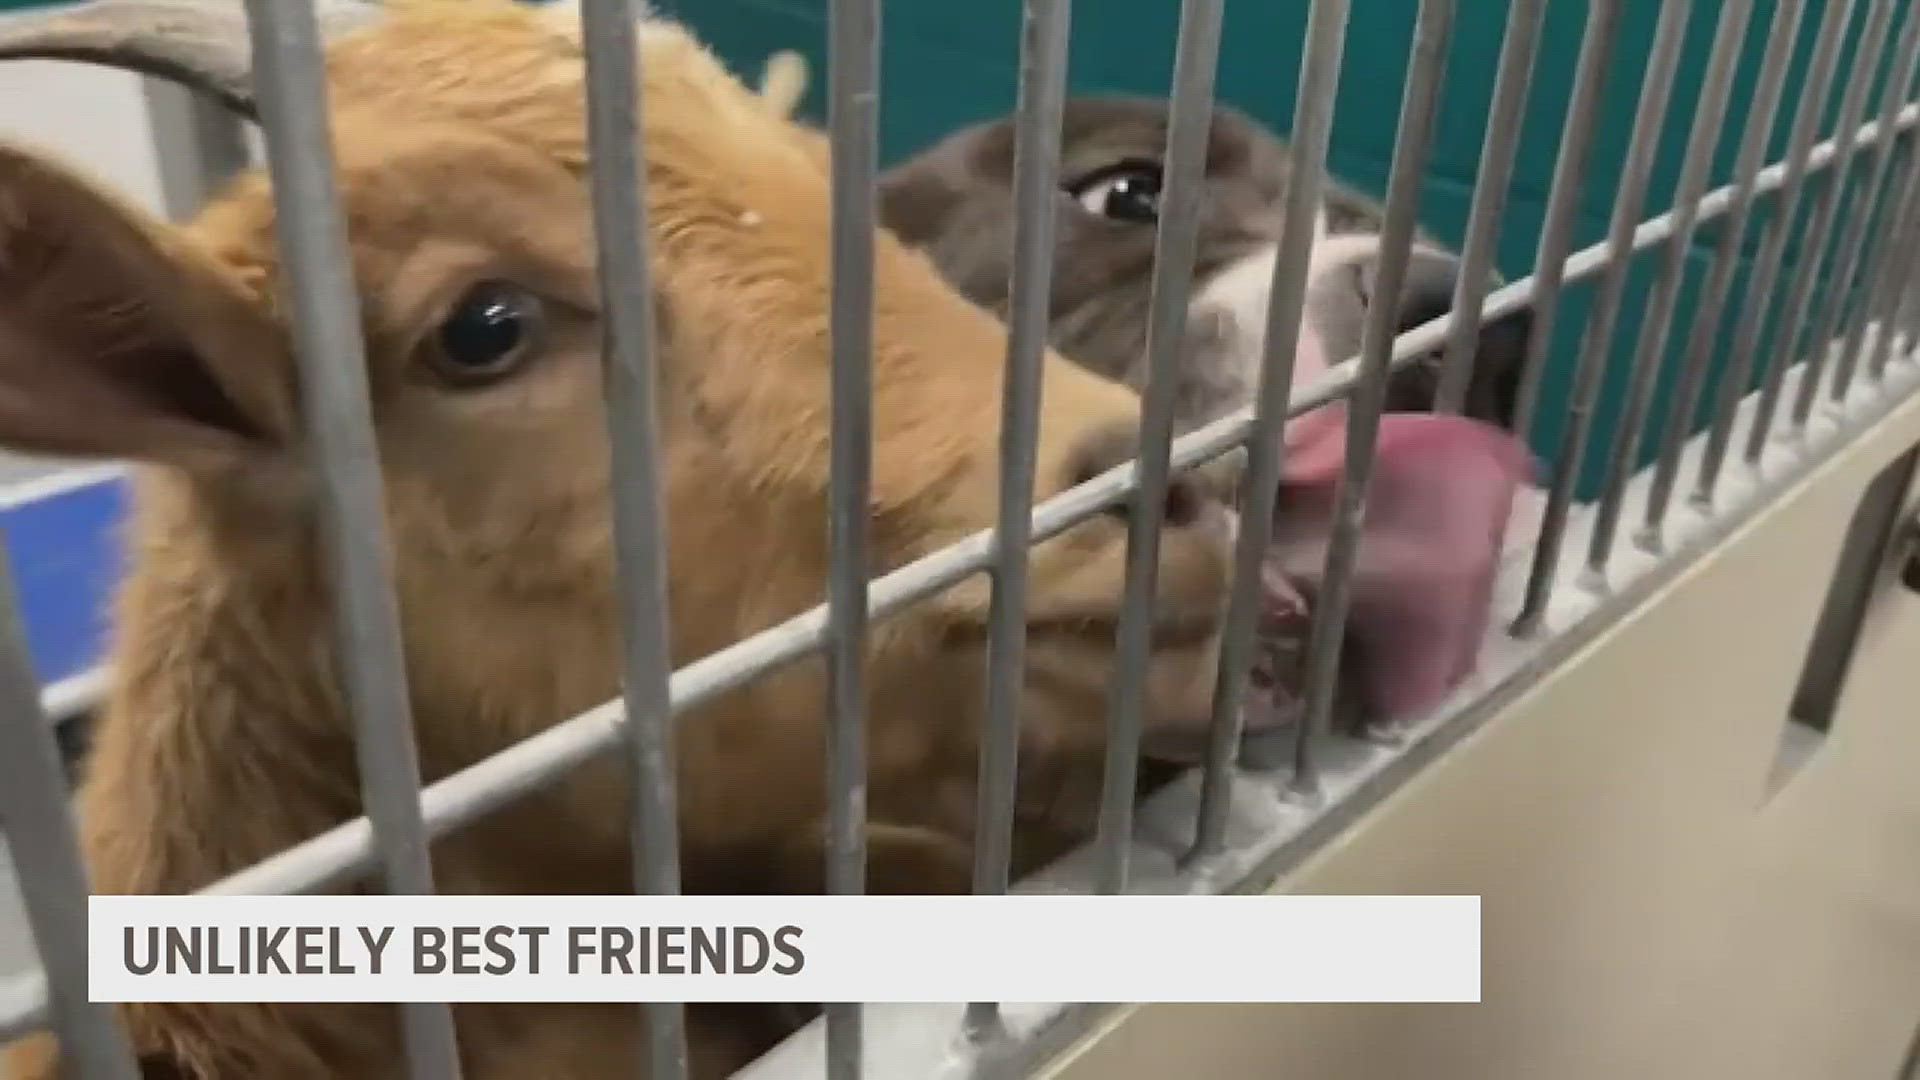 The unlikely duo was surrendered to a shelter and now they are up for adoption.